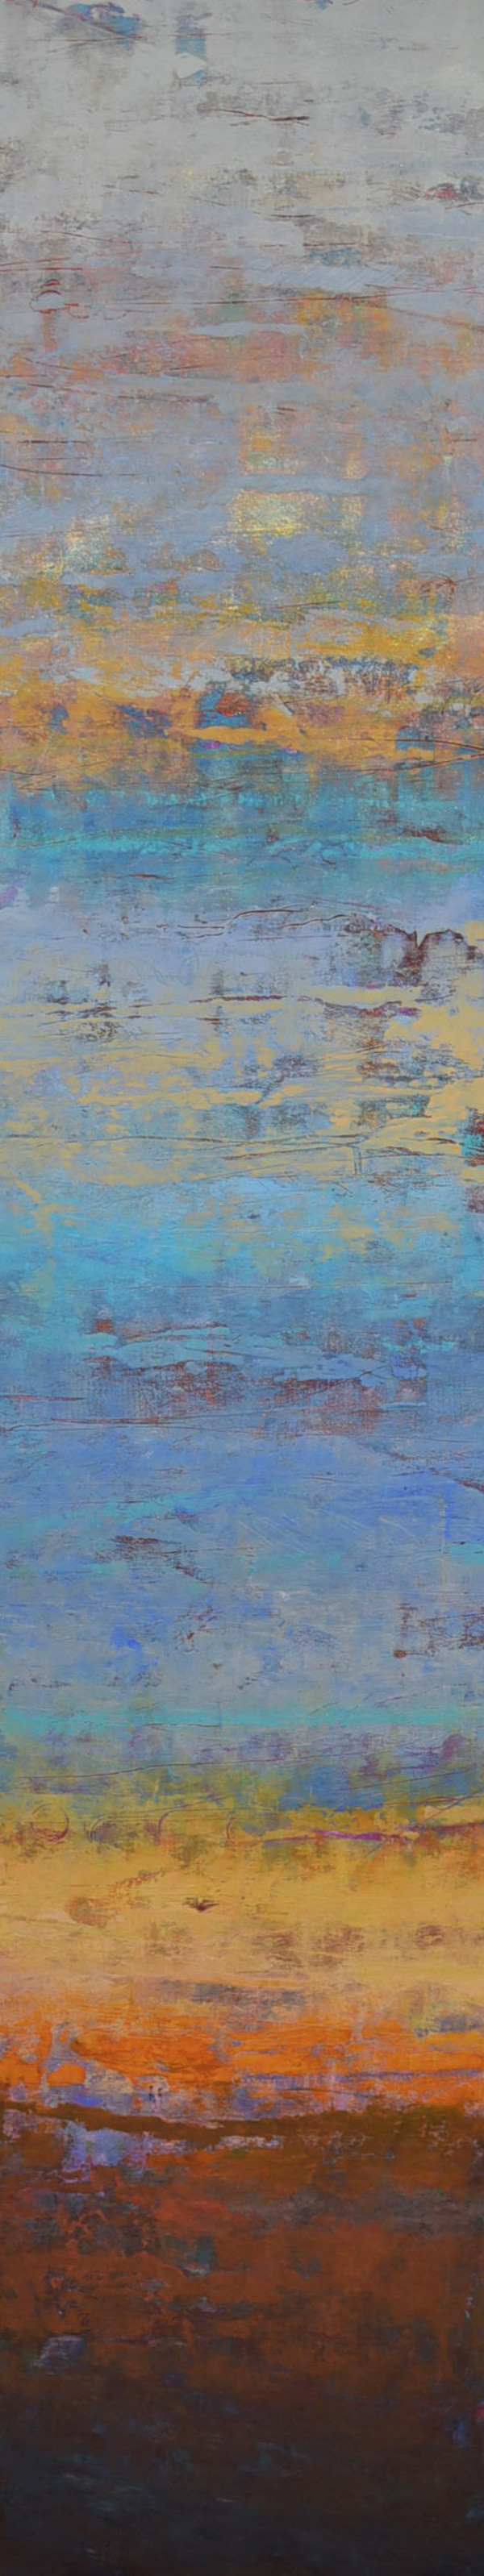 Holding Space in the Unknown I, 60x12" by Ginnie Cappaert